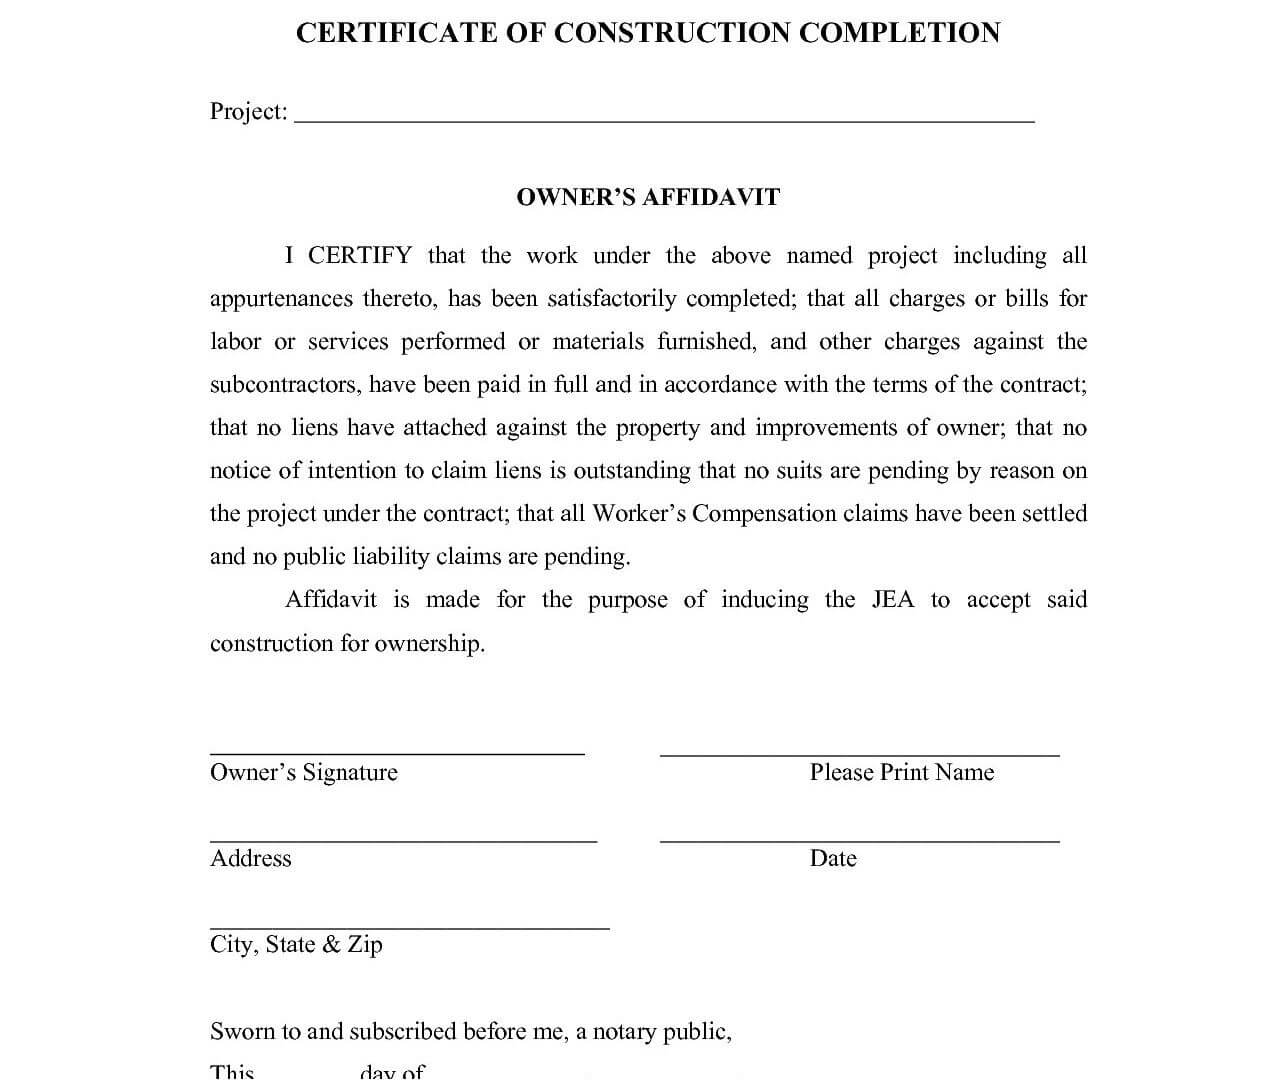 Work Completion Certificate Template – Horizonconsulting.co Regarding Certificate Of Completion Template Construction